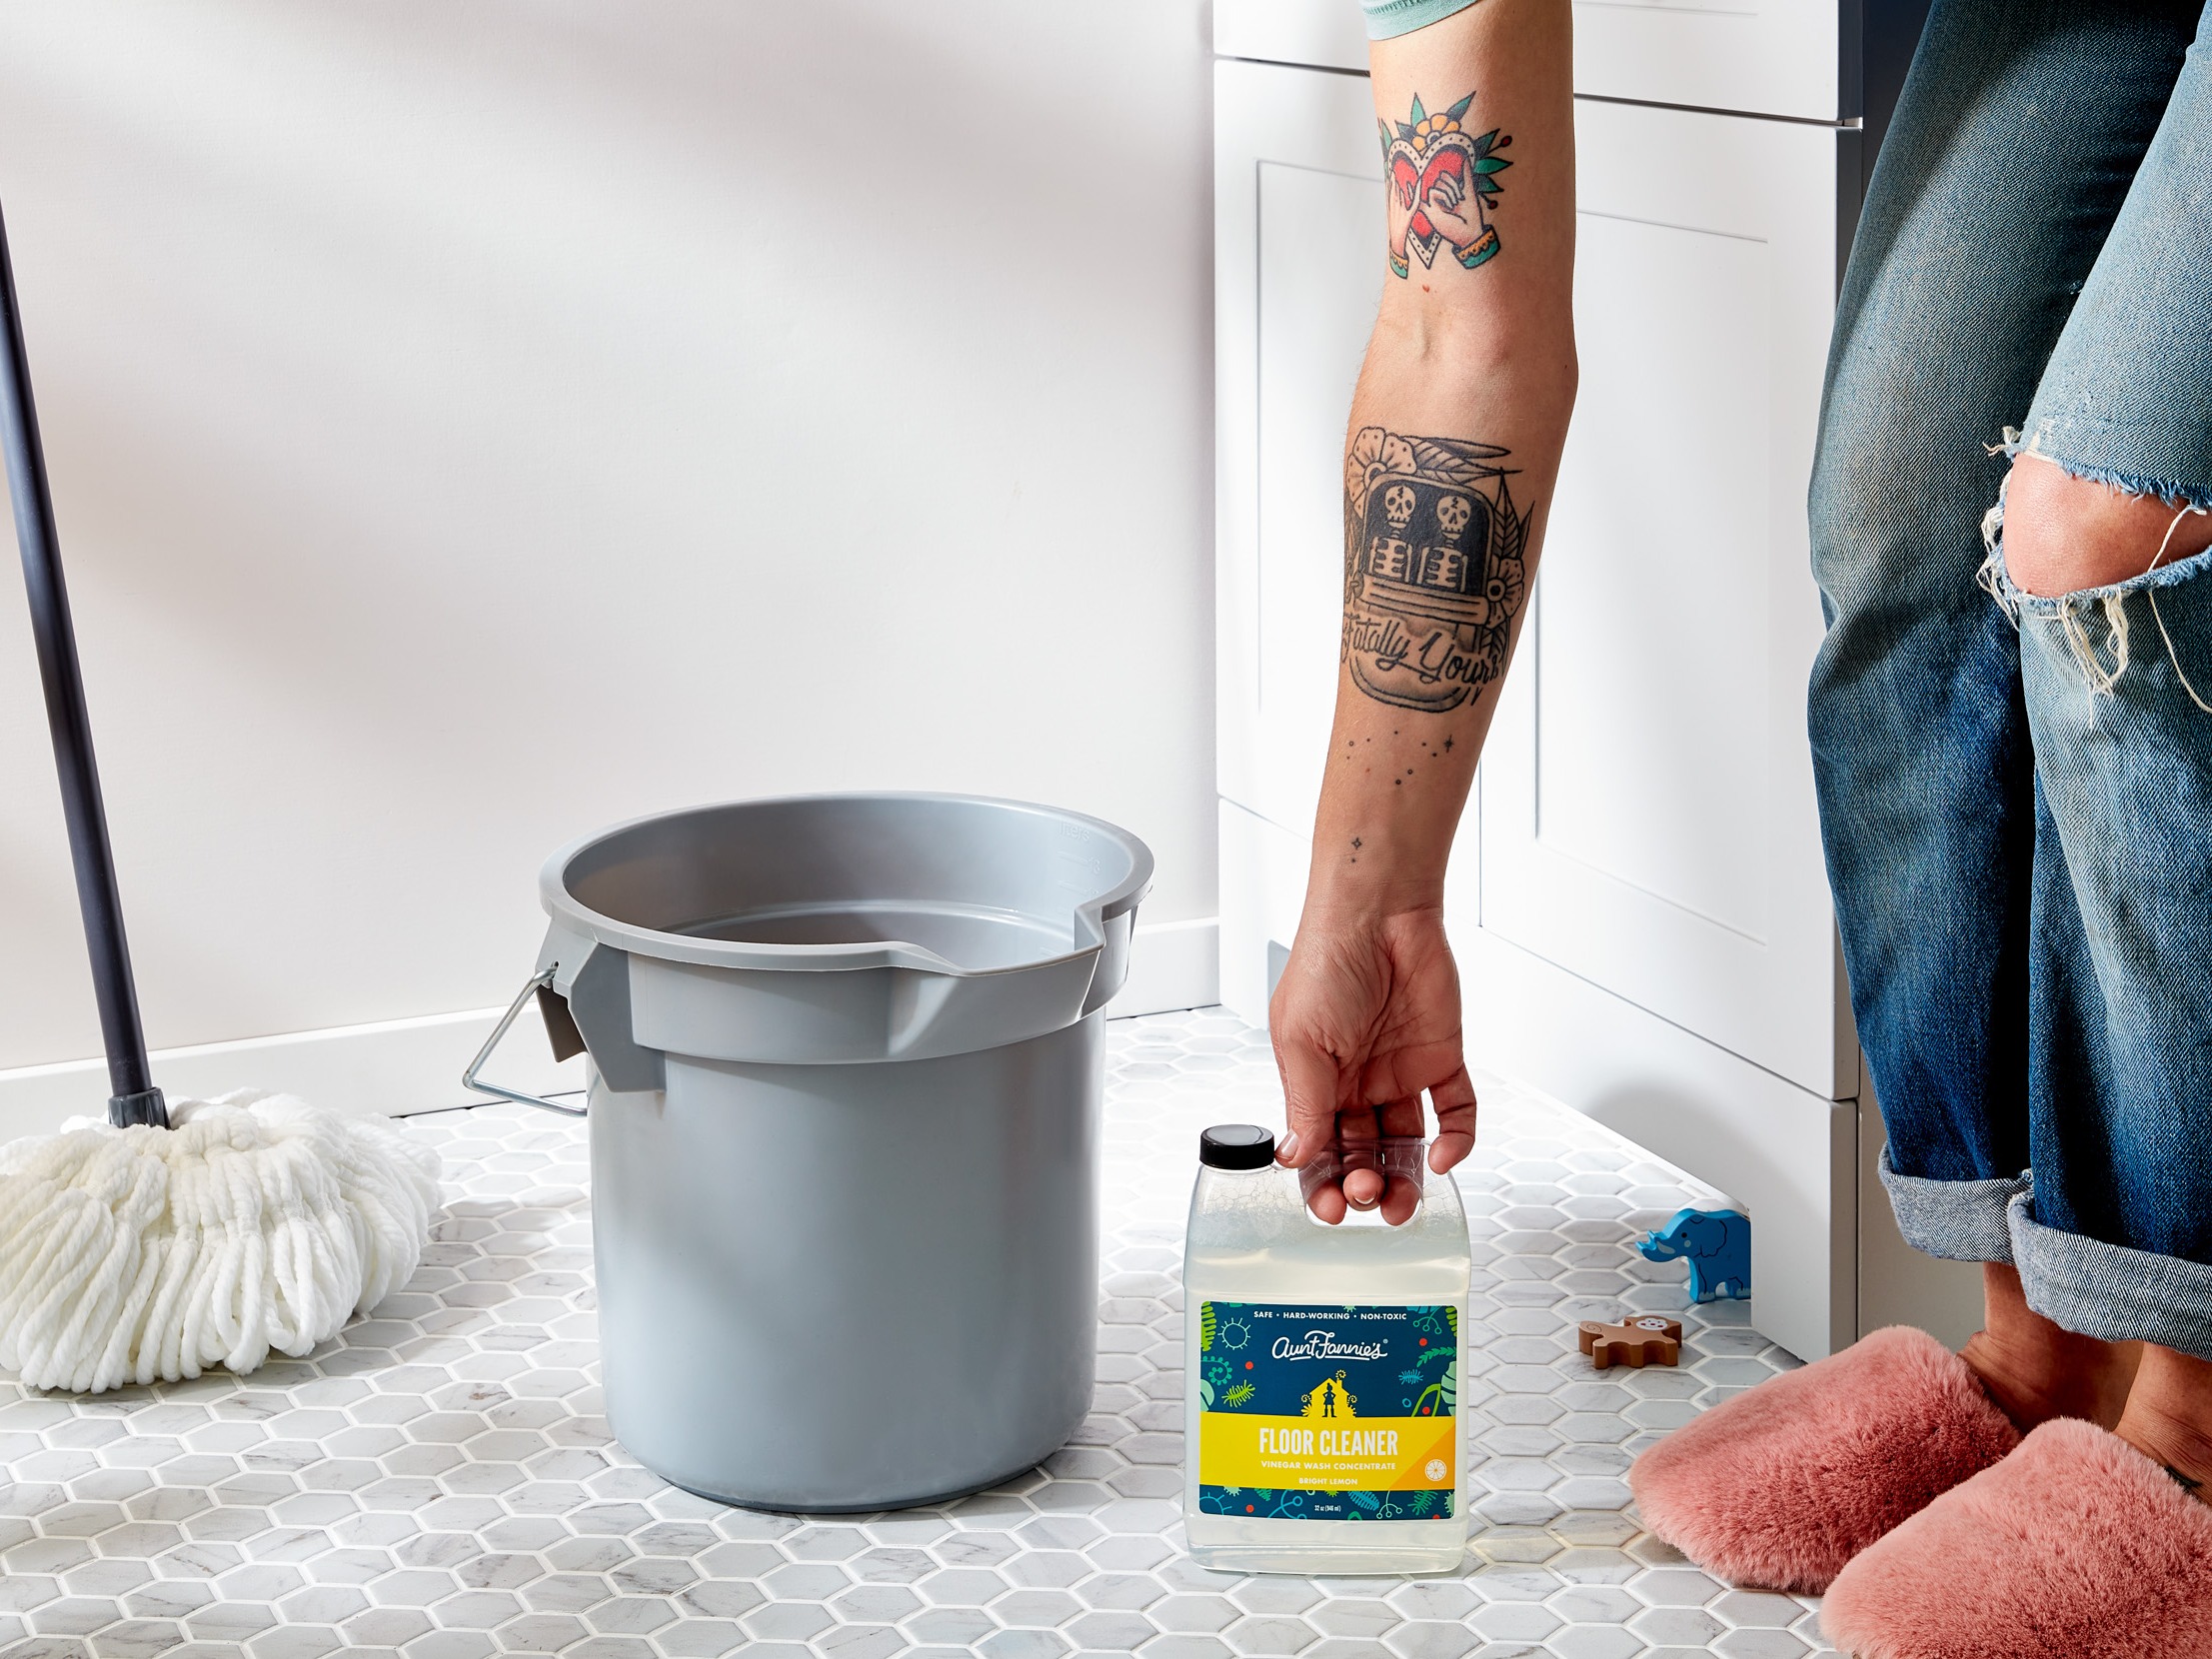 Image of person reaching down to get Aunt Fannie's floor cleaner bottle next to bucket and mop